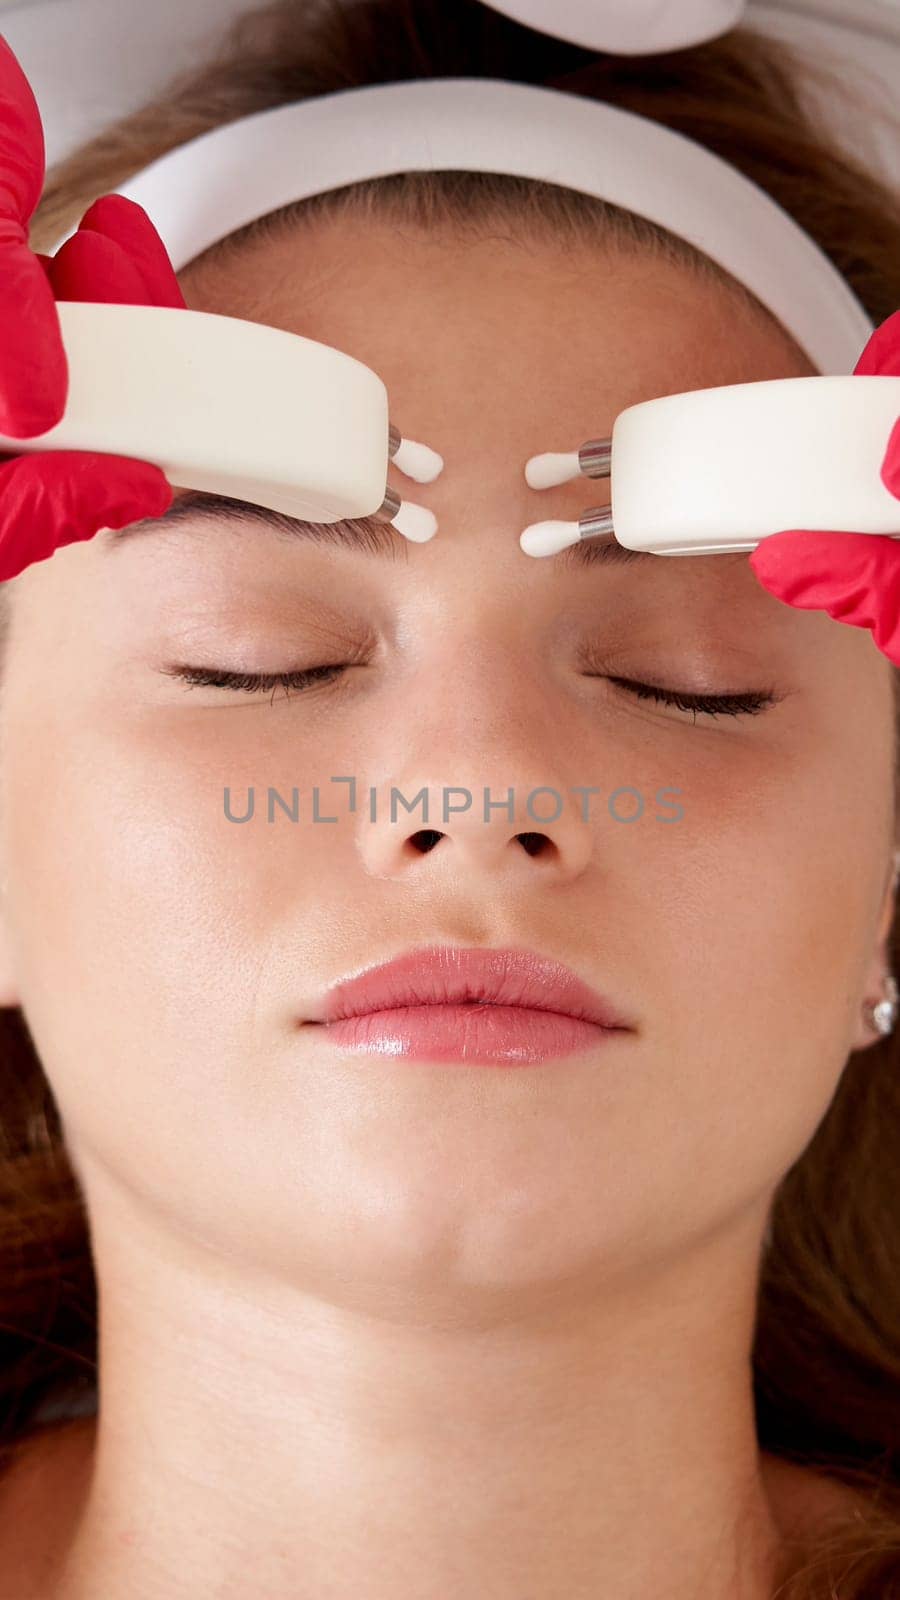 Beautiful Woman in Spa Clinic Receiving Stimulating Electric Facial Treatment From Therapist. Closeup Of Young Female Face During Microcurrent Therapy by Mariakray